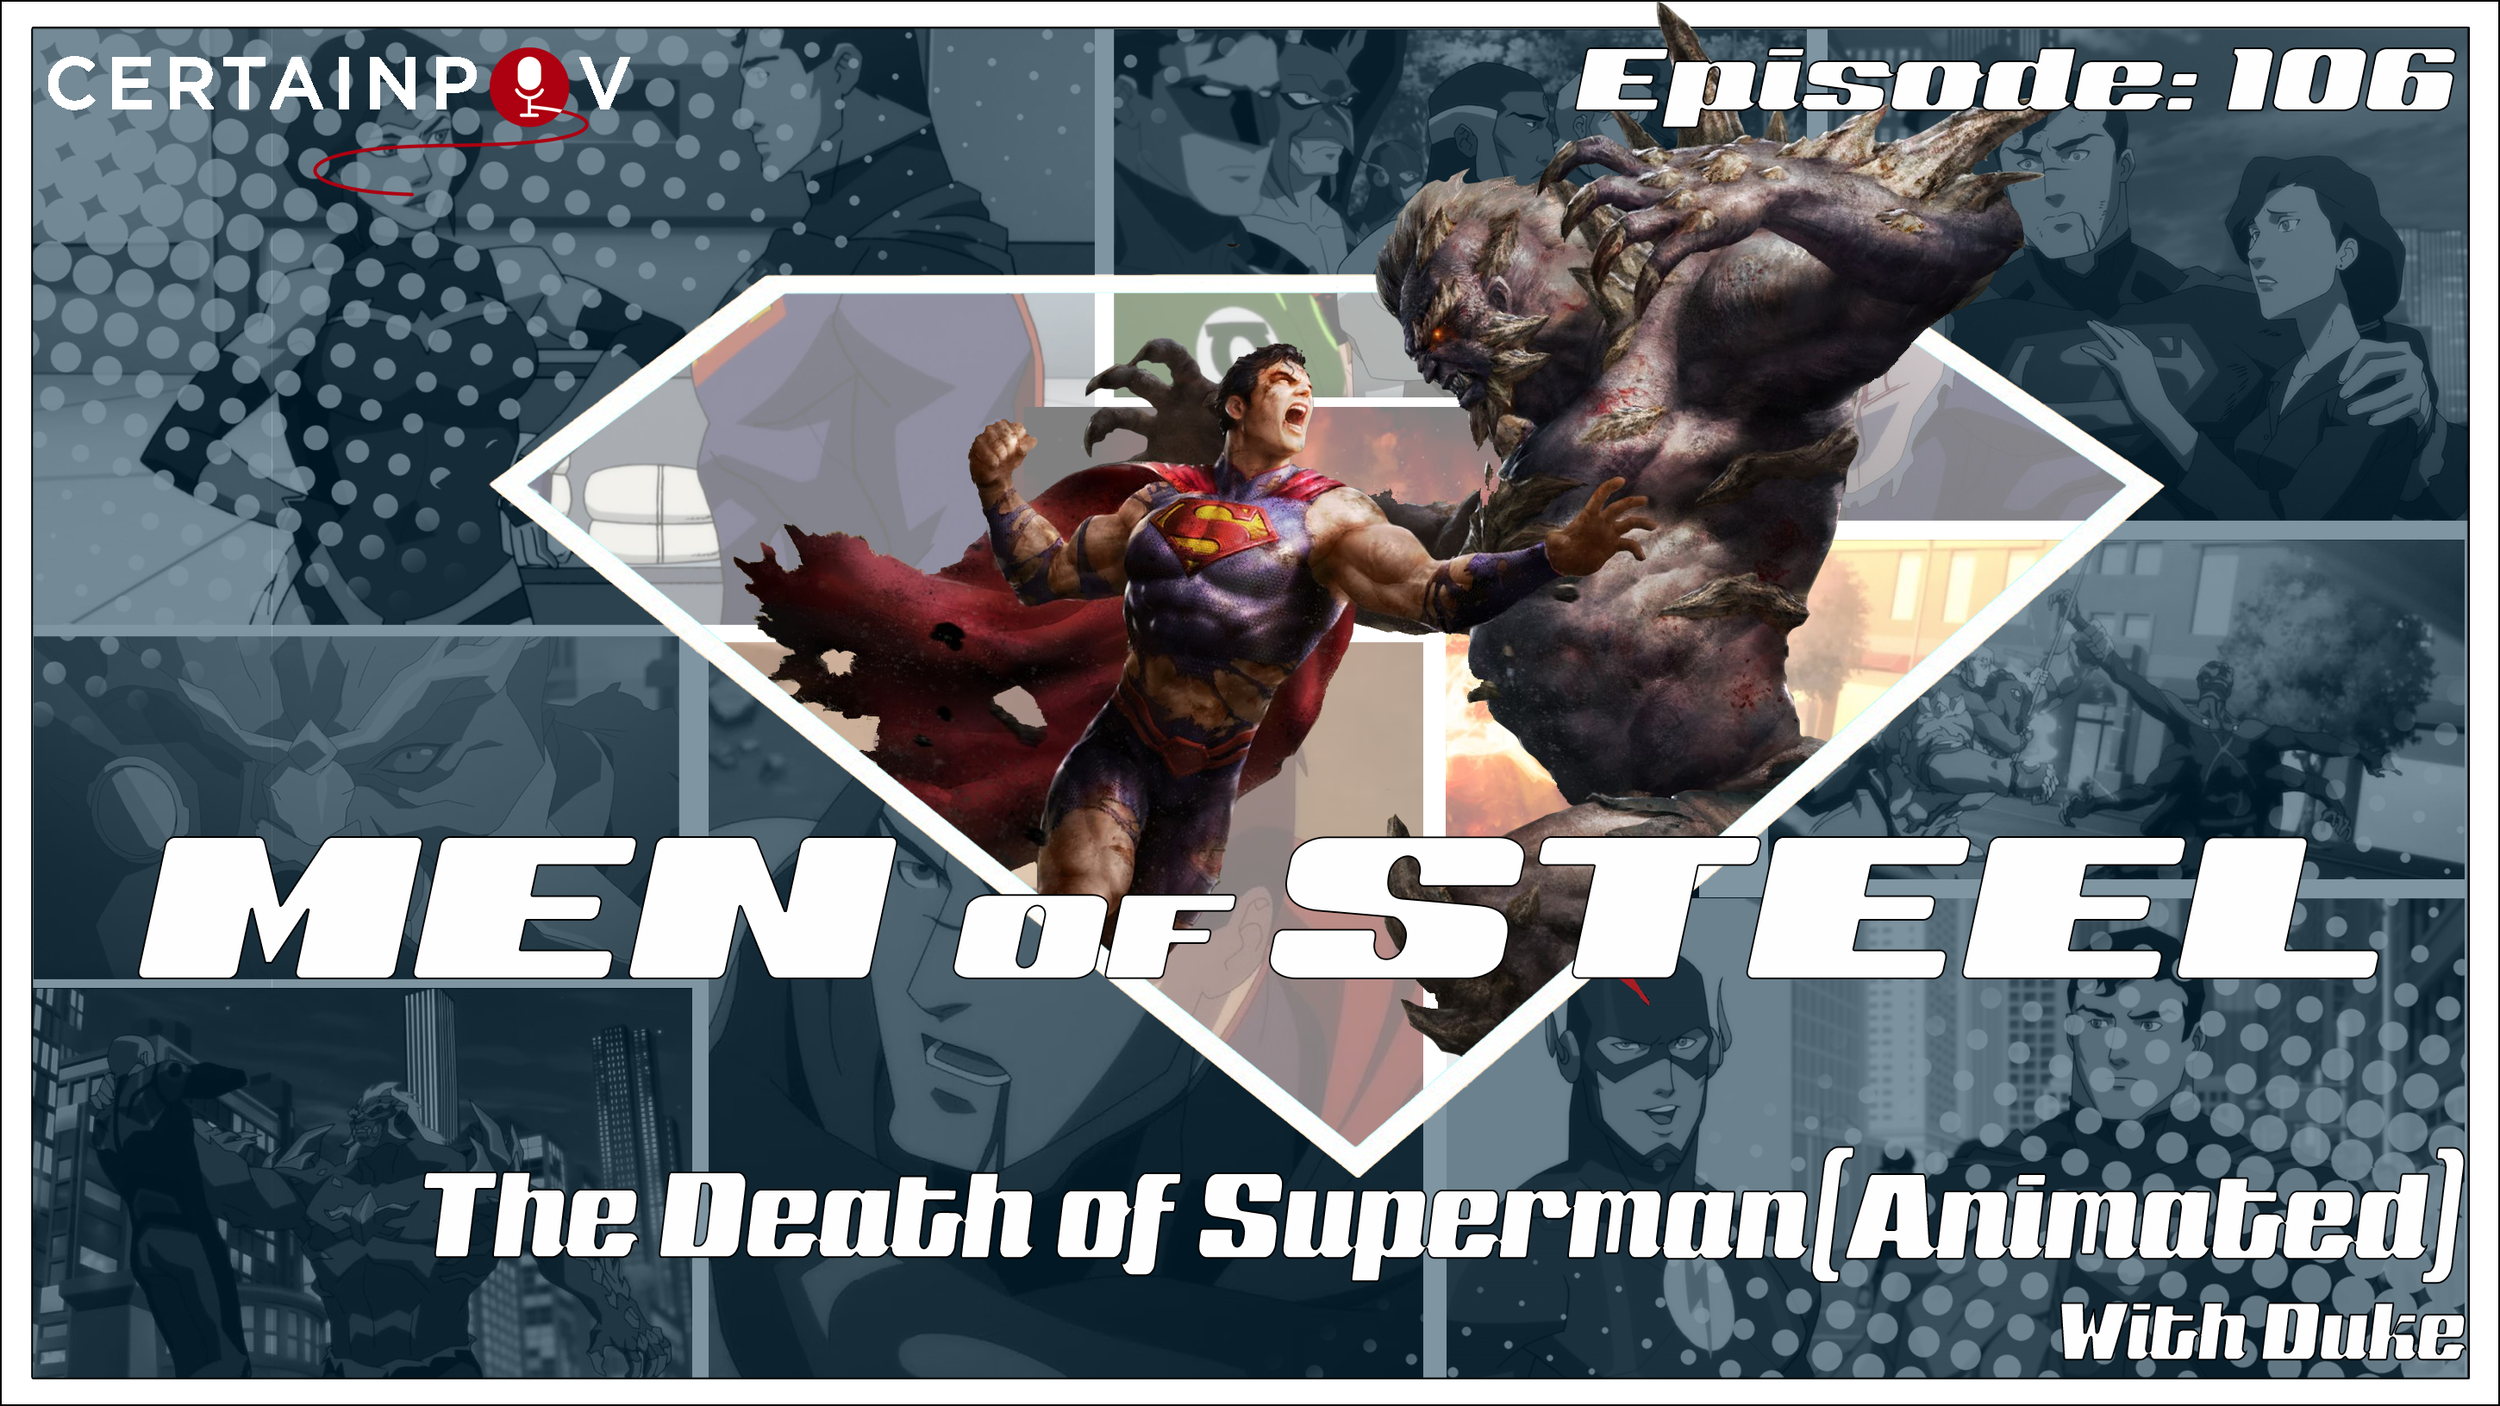 Episode 106 - The Death of Superman (Animated) with Duke — Certain POV